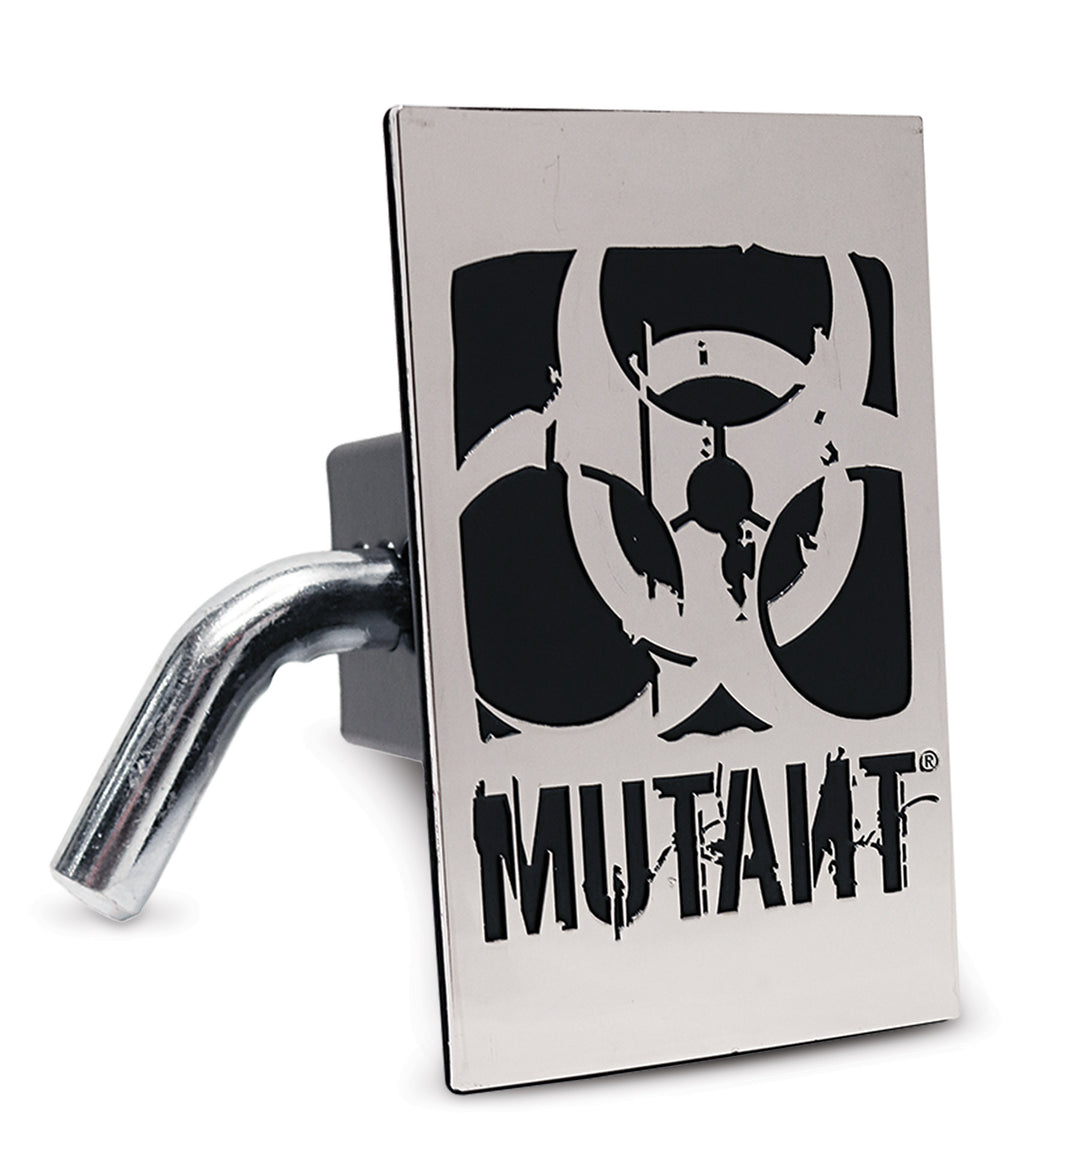 A photo showcasing the Rugged Trailer Hitch Cover & Locking Pin, crafted from durable solid steel with a black MUTANT logo, set against a white background.